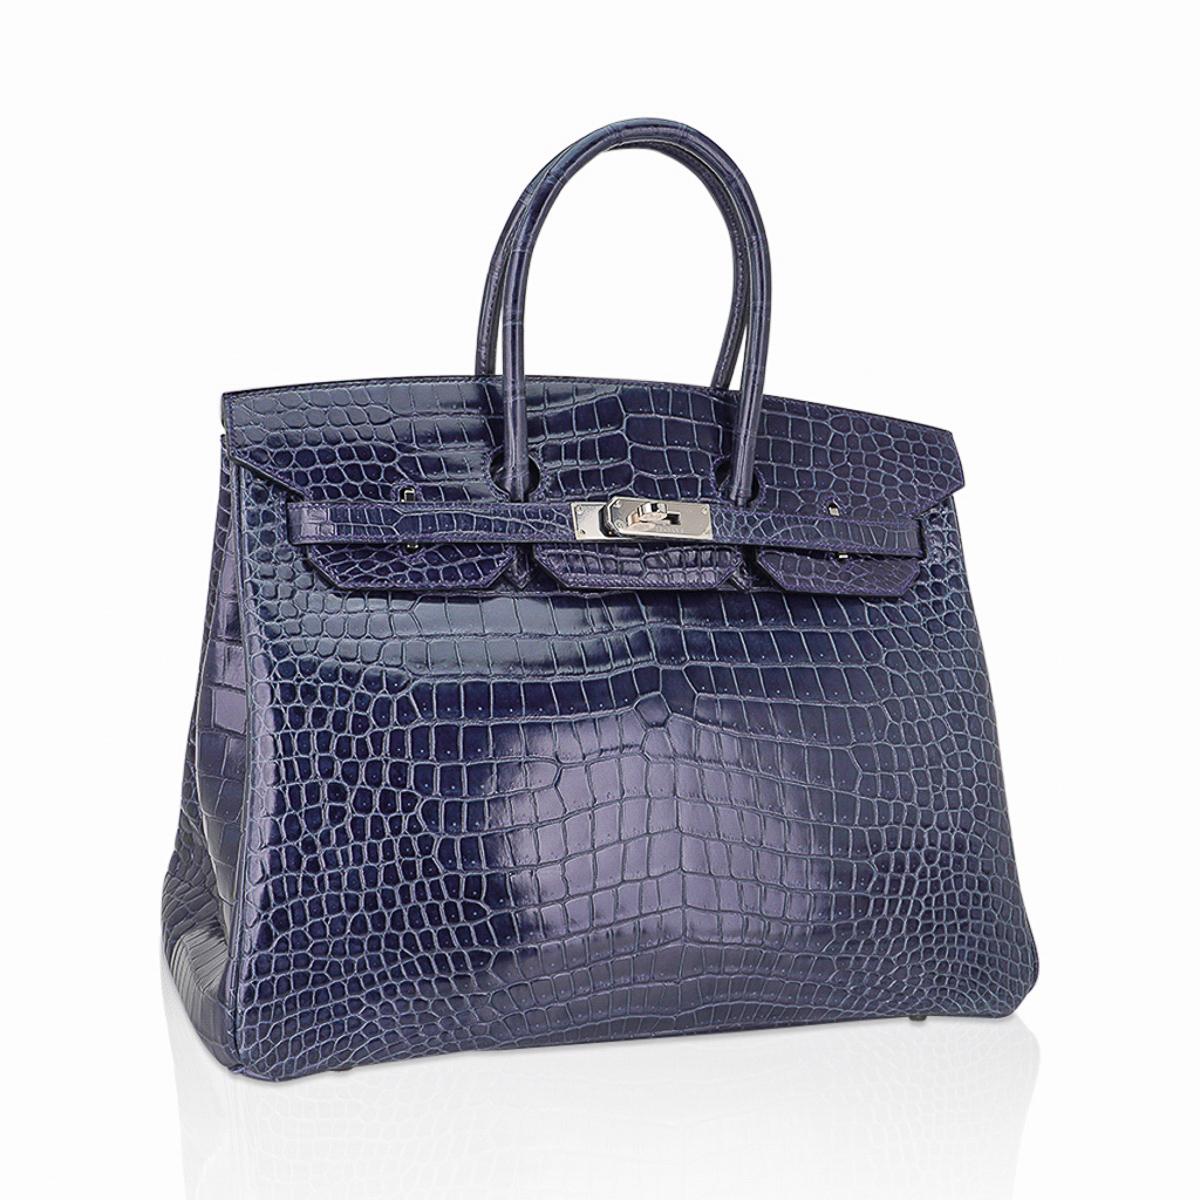 Mightychic offers an Hermes Birkin 35 bag featured in limited edition Blue Roi Porosus Crocodile.
This Hermes crocodile Birkin bag is a muted saturated blue that is perfect for year round wear.
Gorgeous with fresh Palladium hardware.
Porosus Hermes